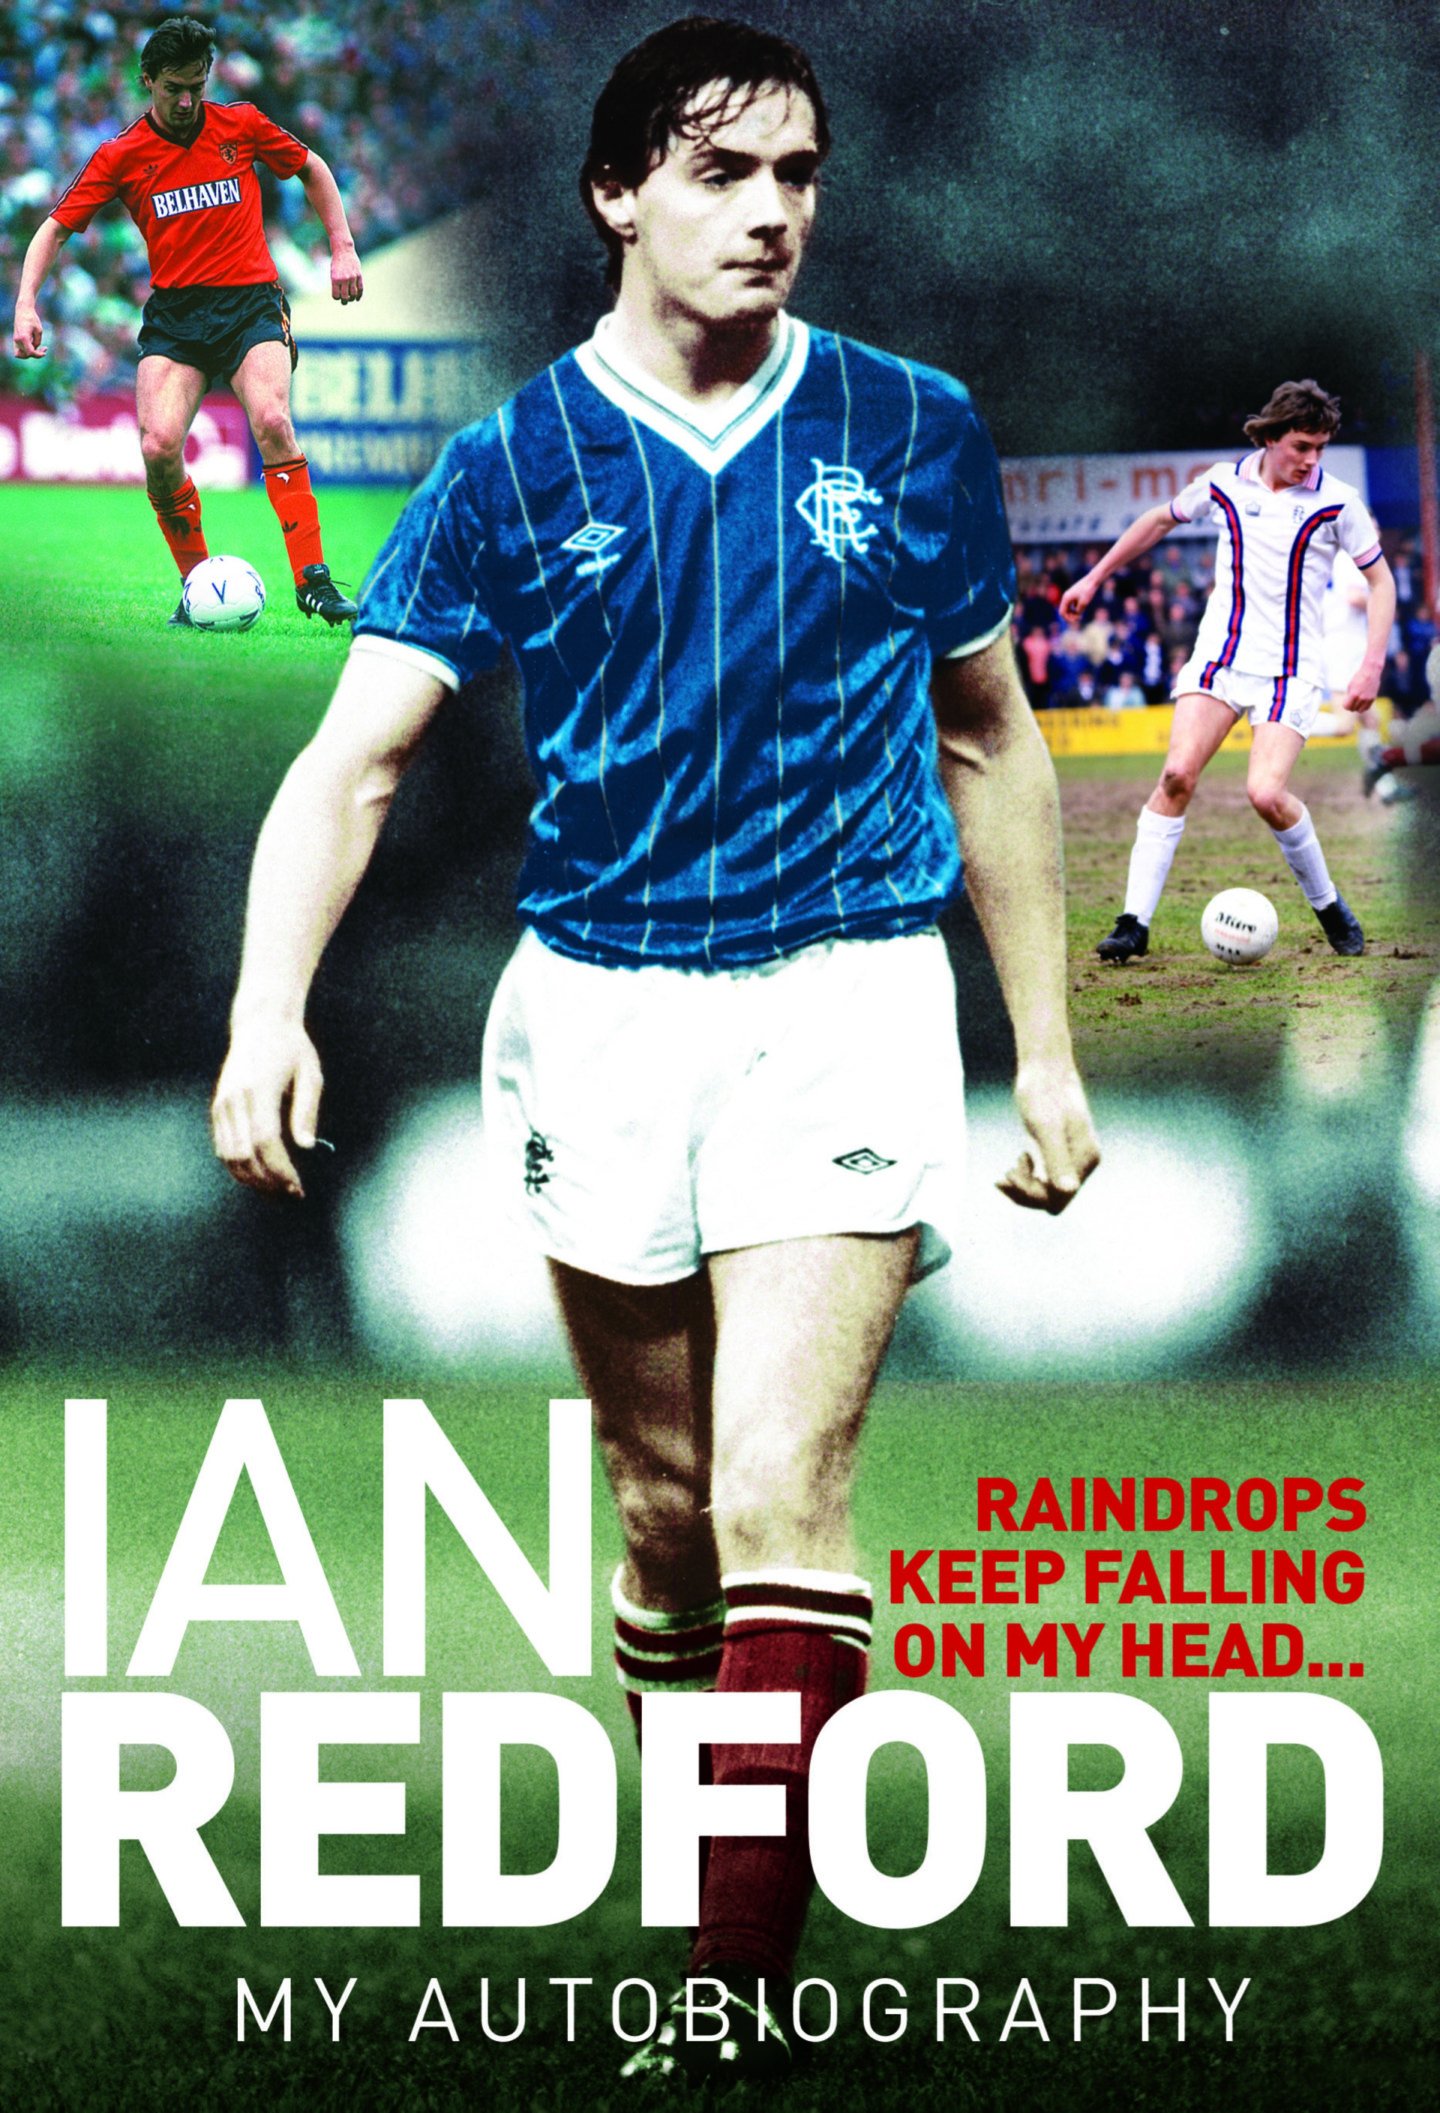 The cover of Redford's autobiography, showing him playing for Dundee United, Rangers and Dundee FC.